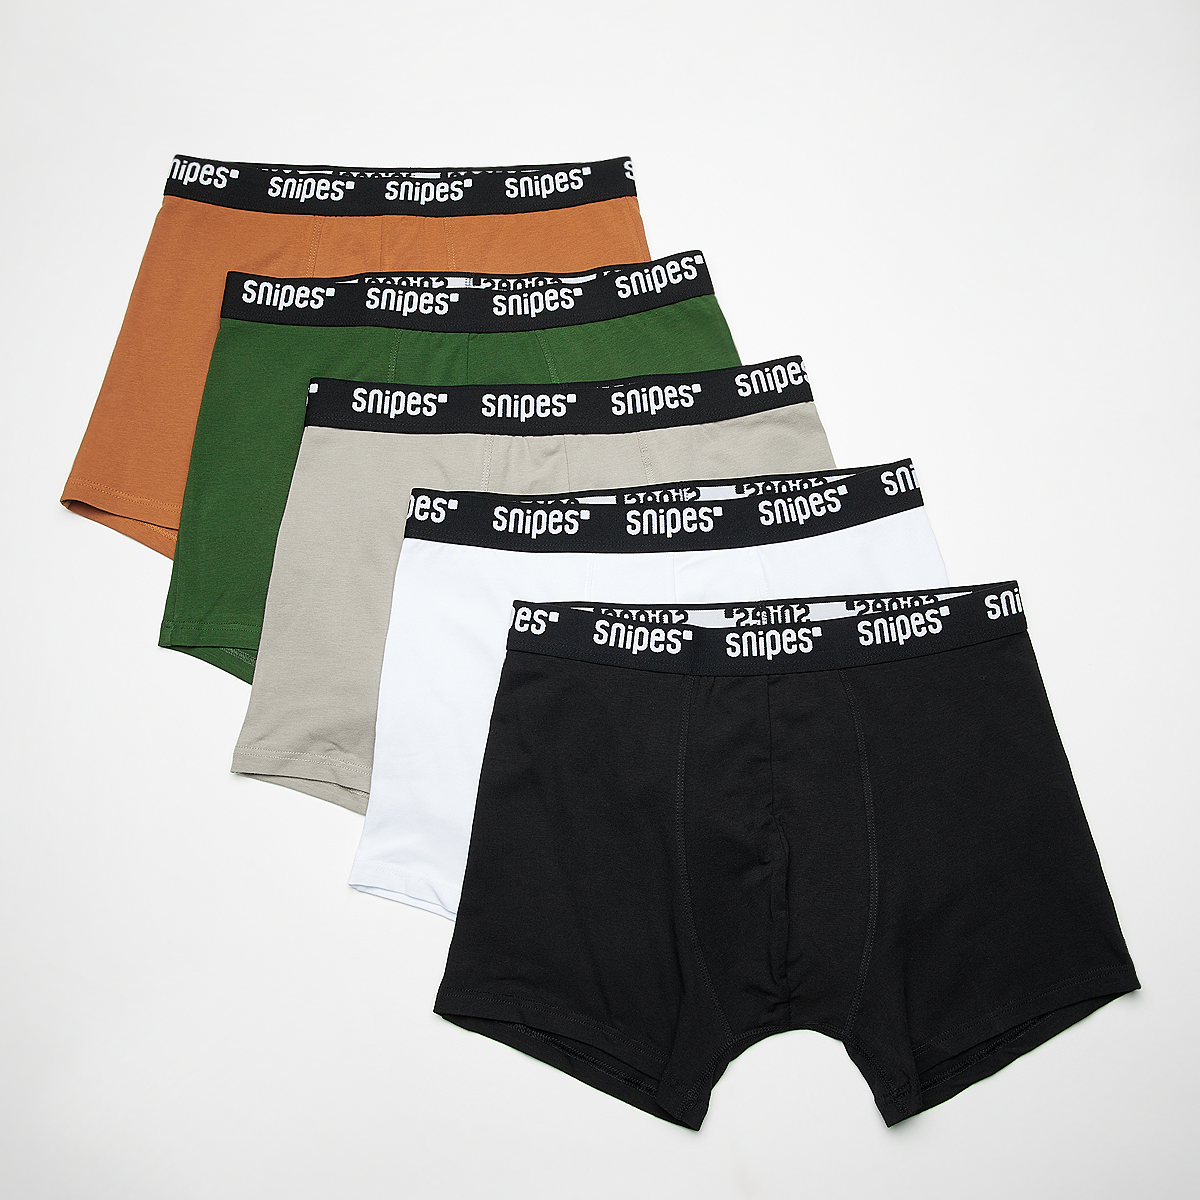 Black Tape Briefs Boxershorts (5 Pack) product